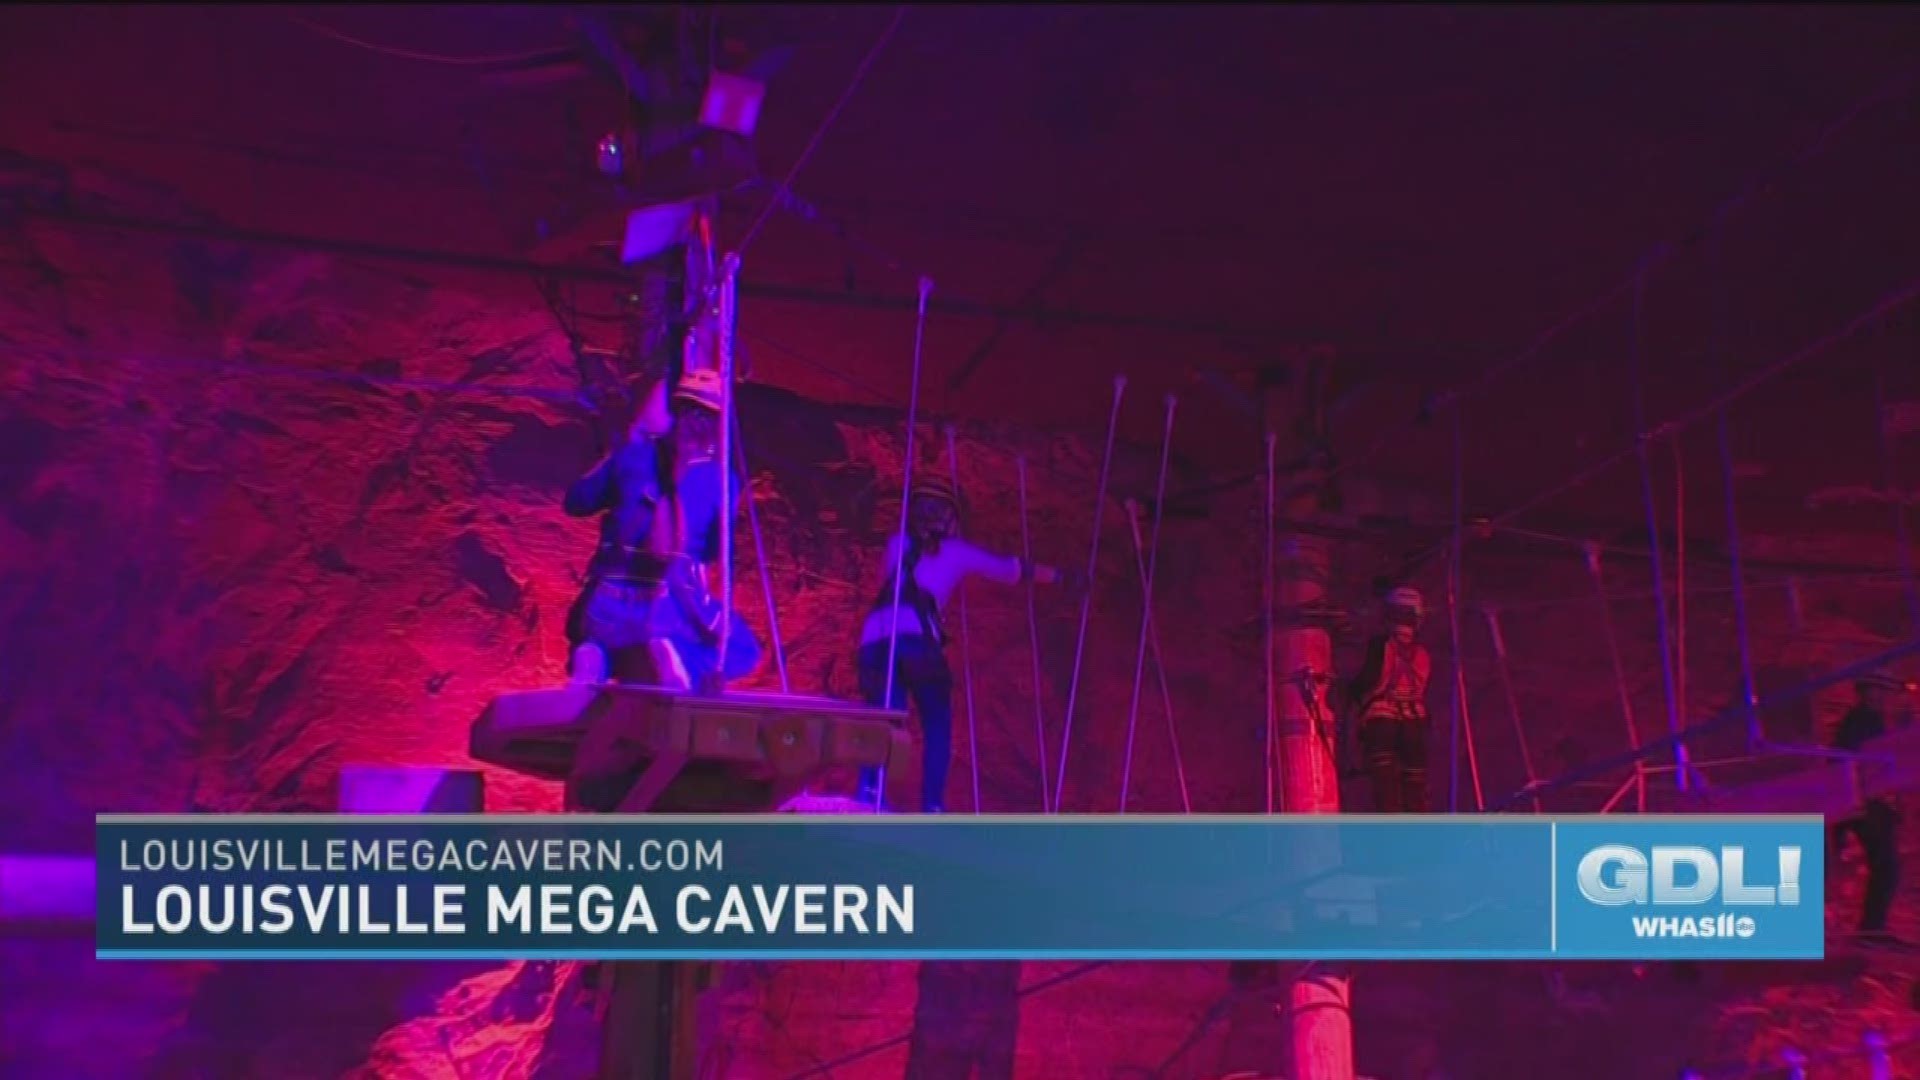 Louisville Mega Cavern is the largest building in the state of Kentucky and stretches under parts of the Watterson Expressway and the Louisville Zoo. Due to its support structures, it is classified as a building. There are activities for the entire family, including Mega Zips, Mega Quest, Mega Tram and Mega E-Bikes. Mega Cavern is located at 1841 Taylor Avenue in Louisville, KY. For more information, call 1-877-614-6342 or go to LouisvilleMegaCavern.com.